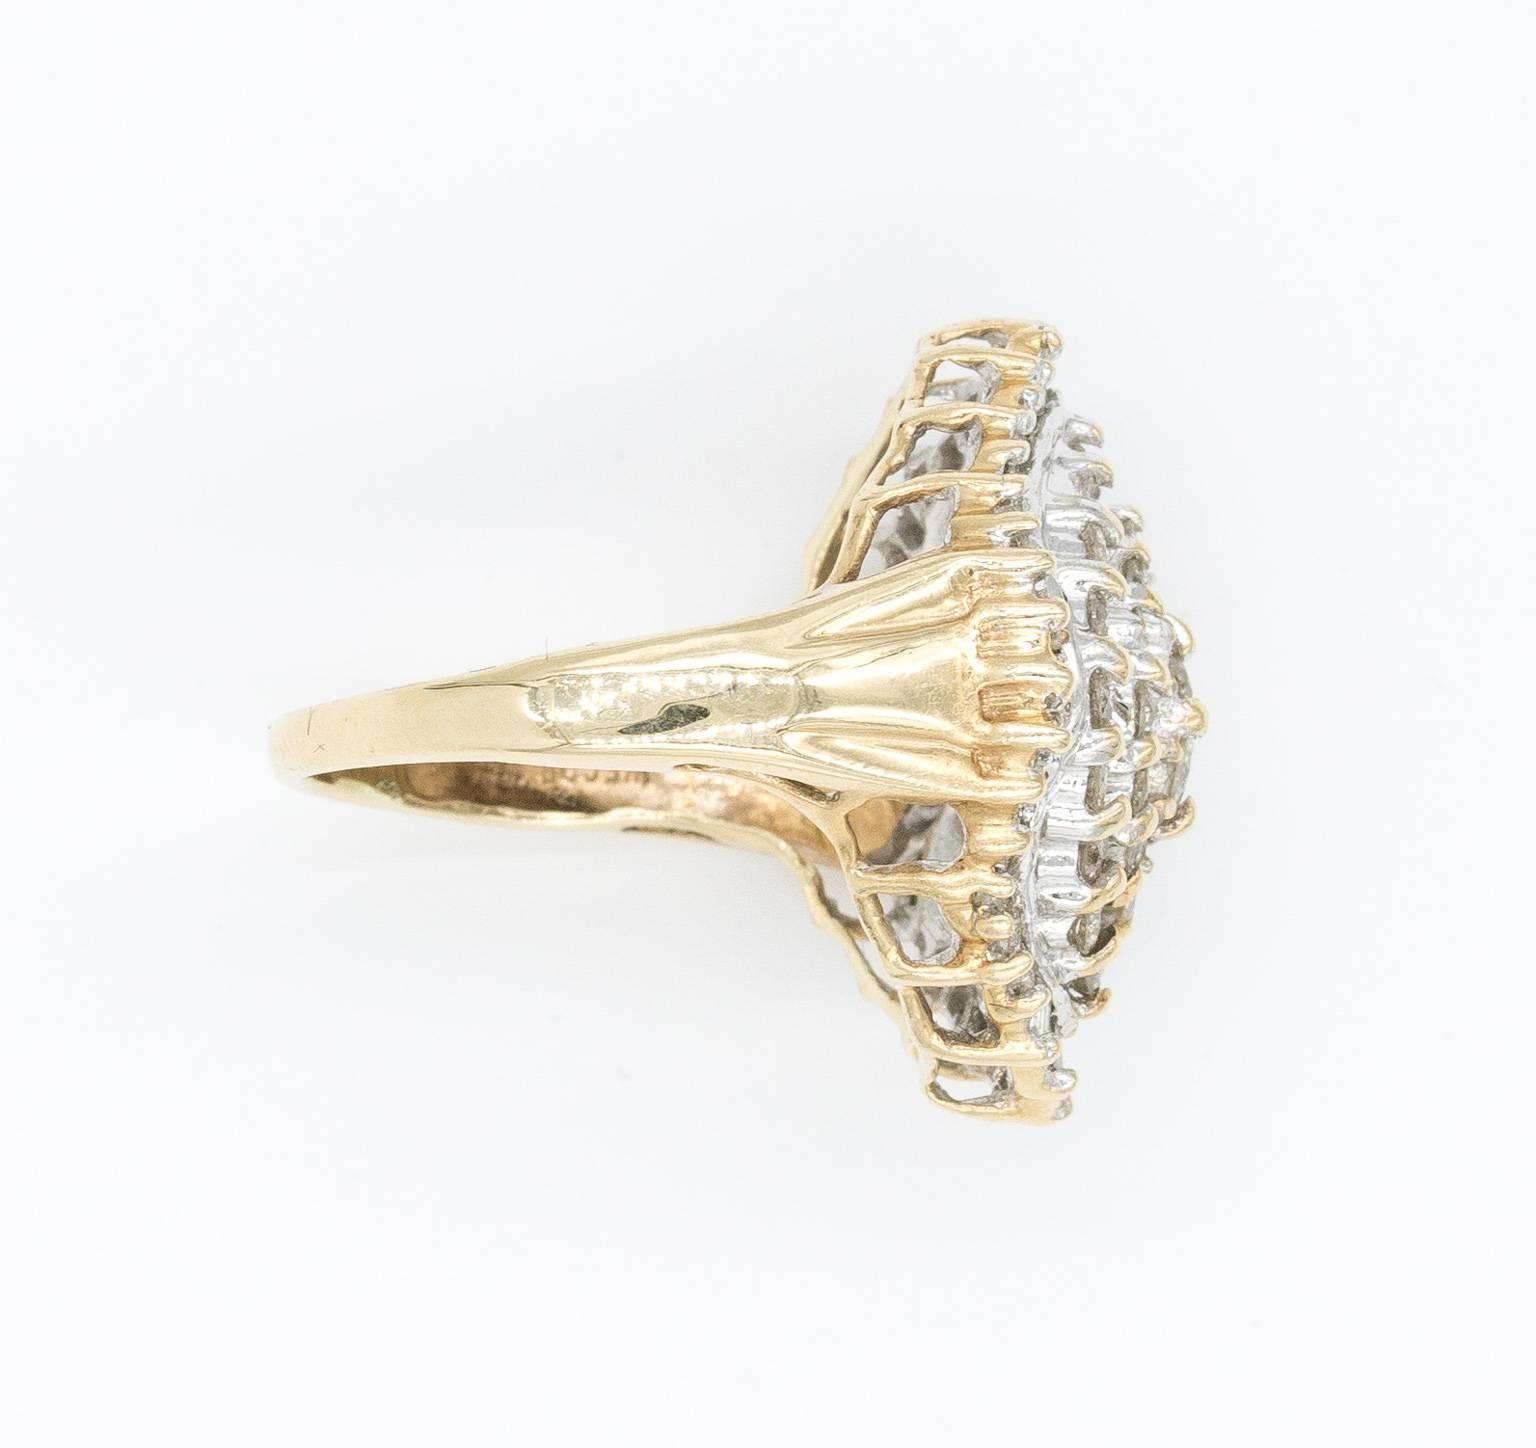 Dazzling statement ring constructed from solid 14K yellow gold and diamonds. Diamonds are round in the center and baguettes on the outer border. They weigh 2 carats in total (200 DT). The ring was crafted in the 1970s and is marked 14K and has a